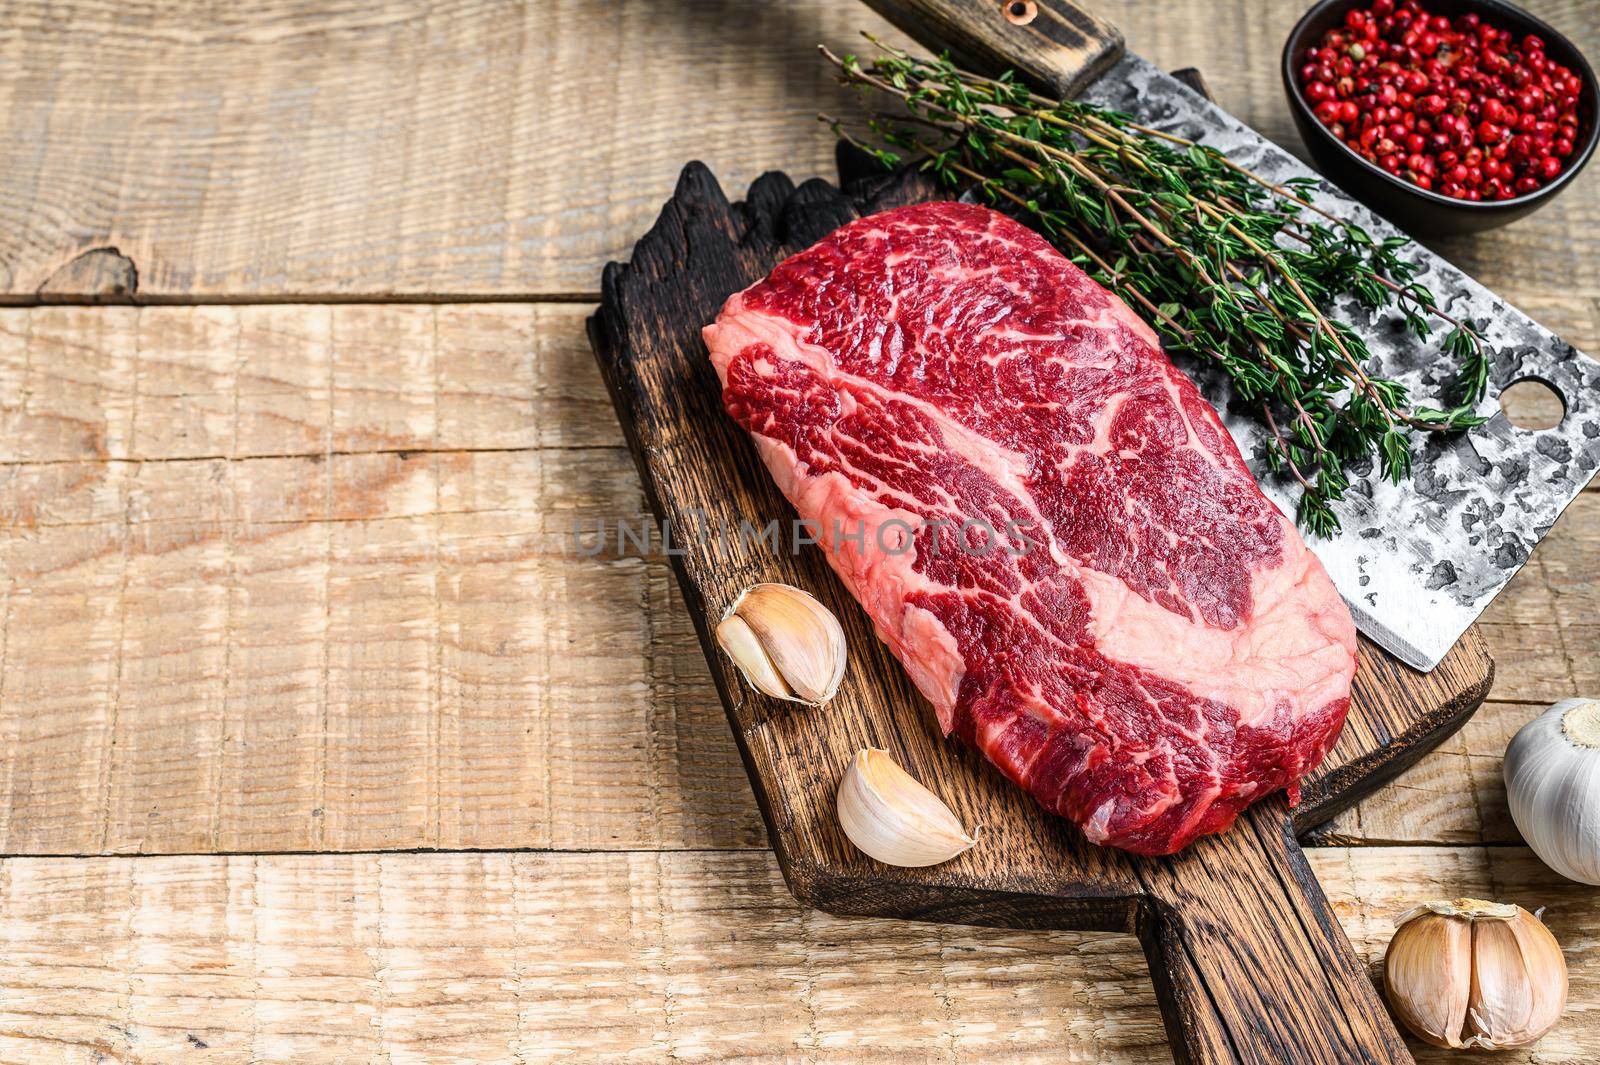 Prime rib eye raw beef meat steak on a butcher wooden cutting board with cleaver. wooden background. Top view. Copy space.